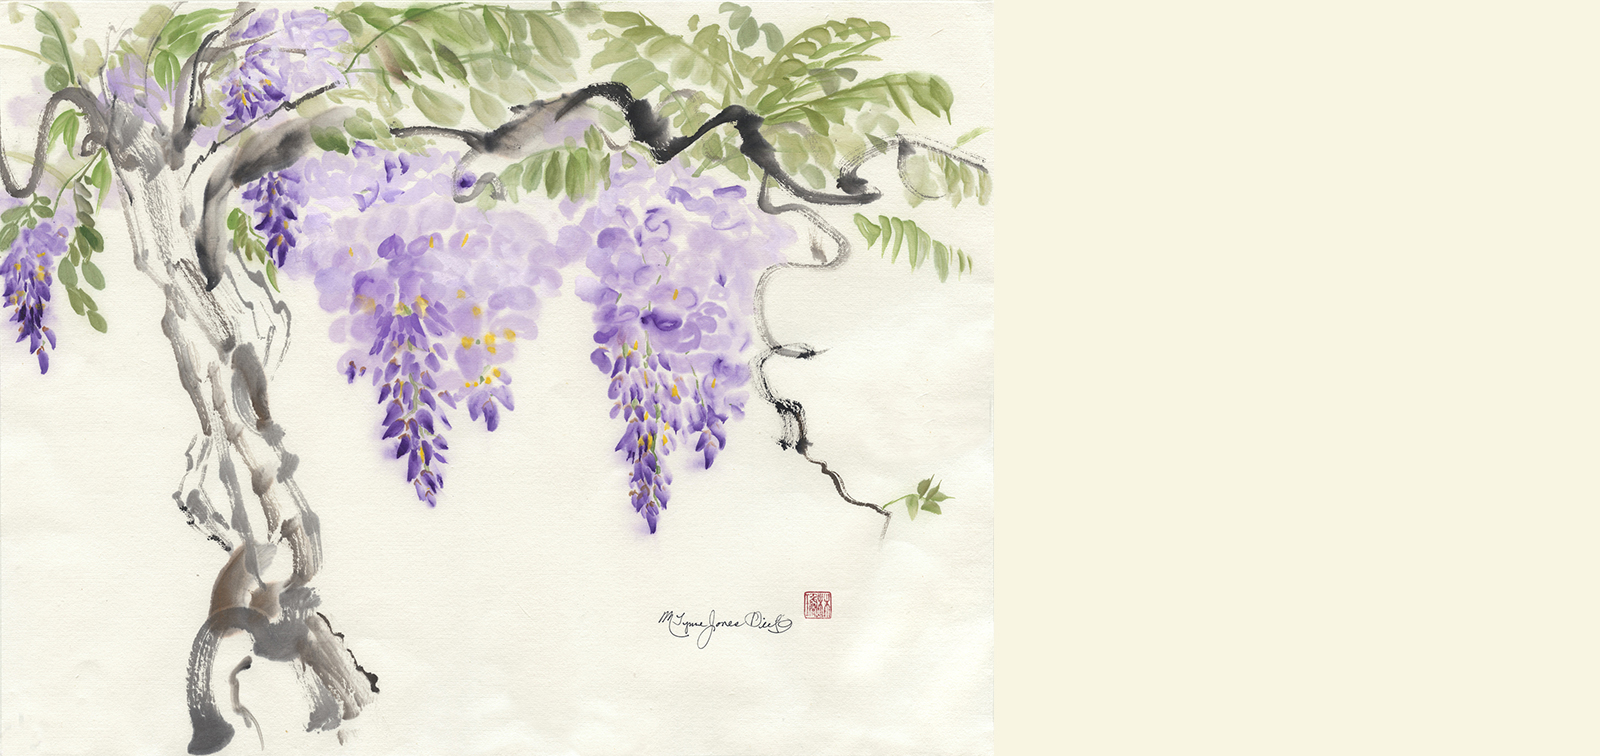 photo painting Wisteria by Lynne Jones Dietze used as background